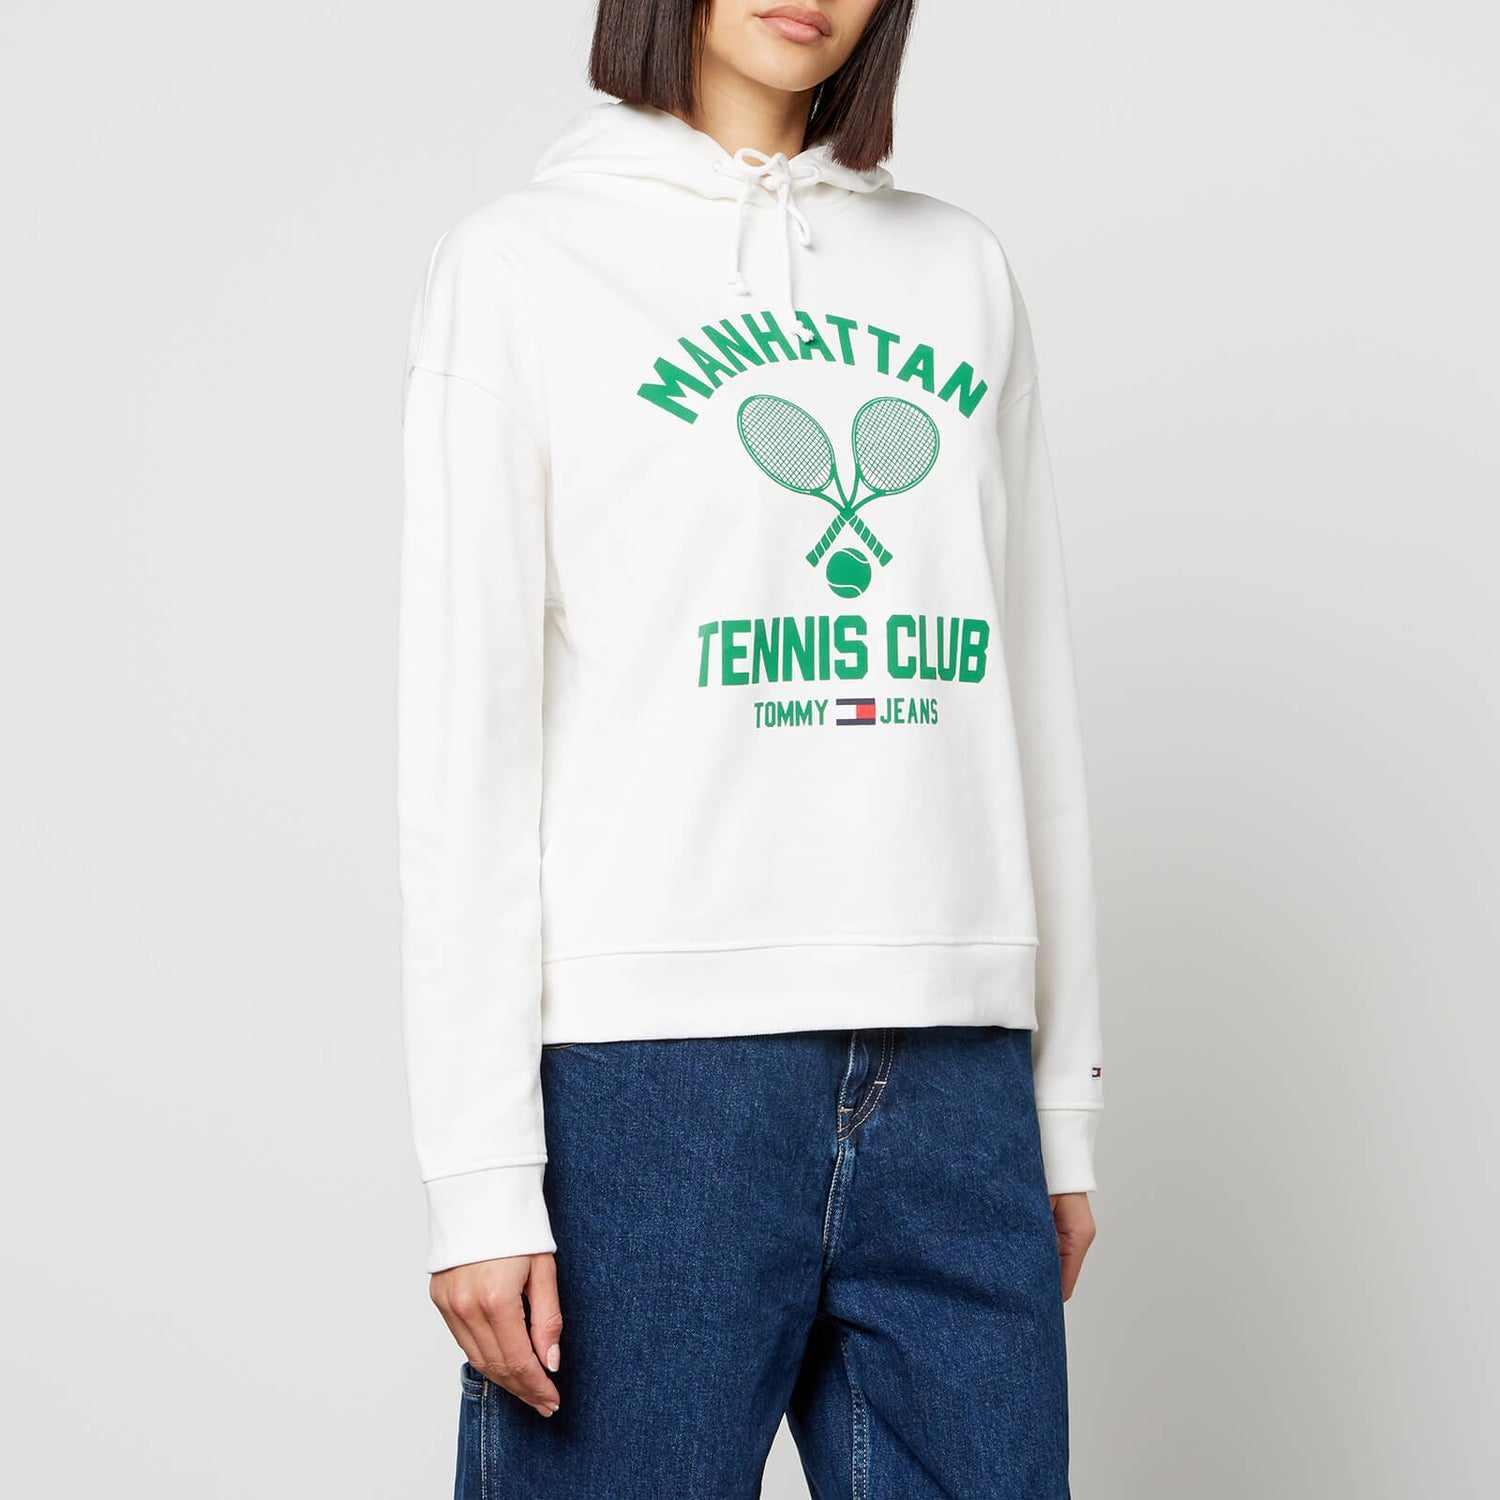 Tommy Jeans Relaxed Tennis Club Cotton Hoodie - XS